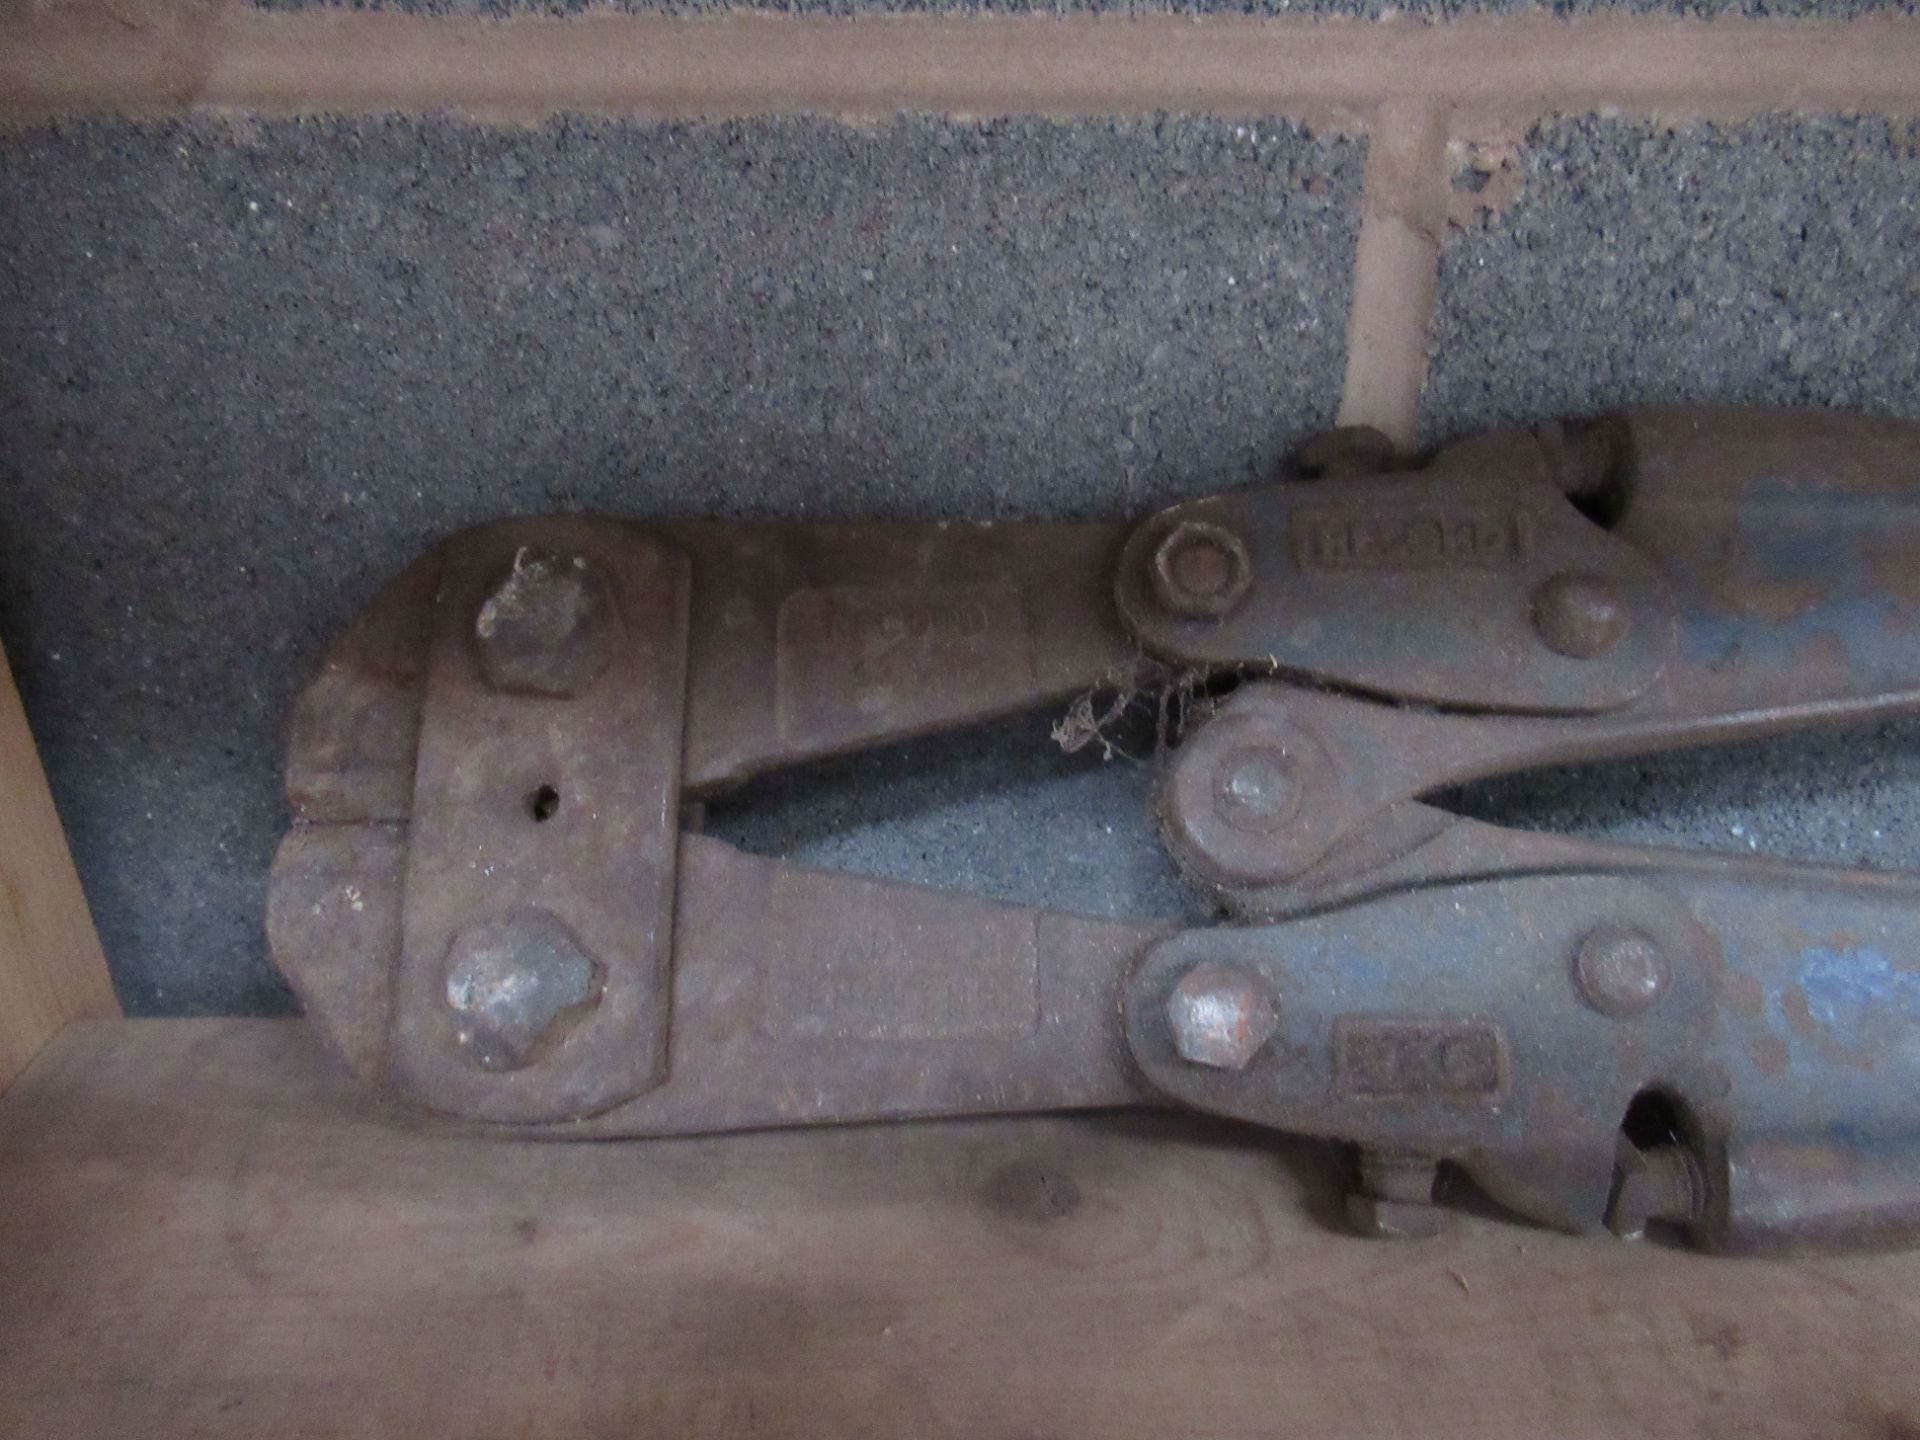 Large Industrial Bolt Croppers - Image 2 of 2